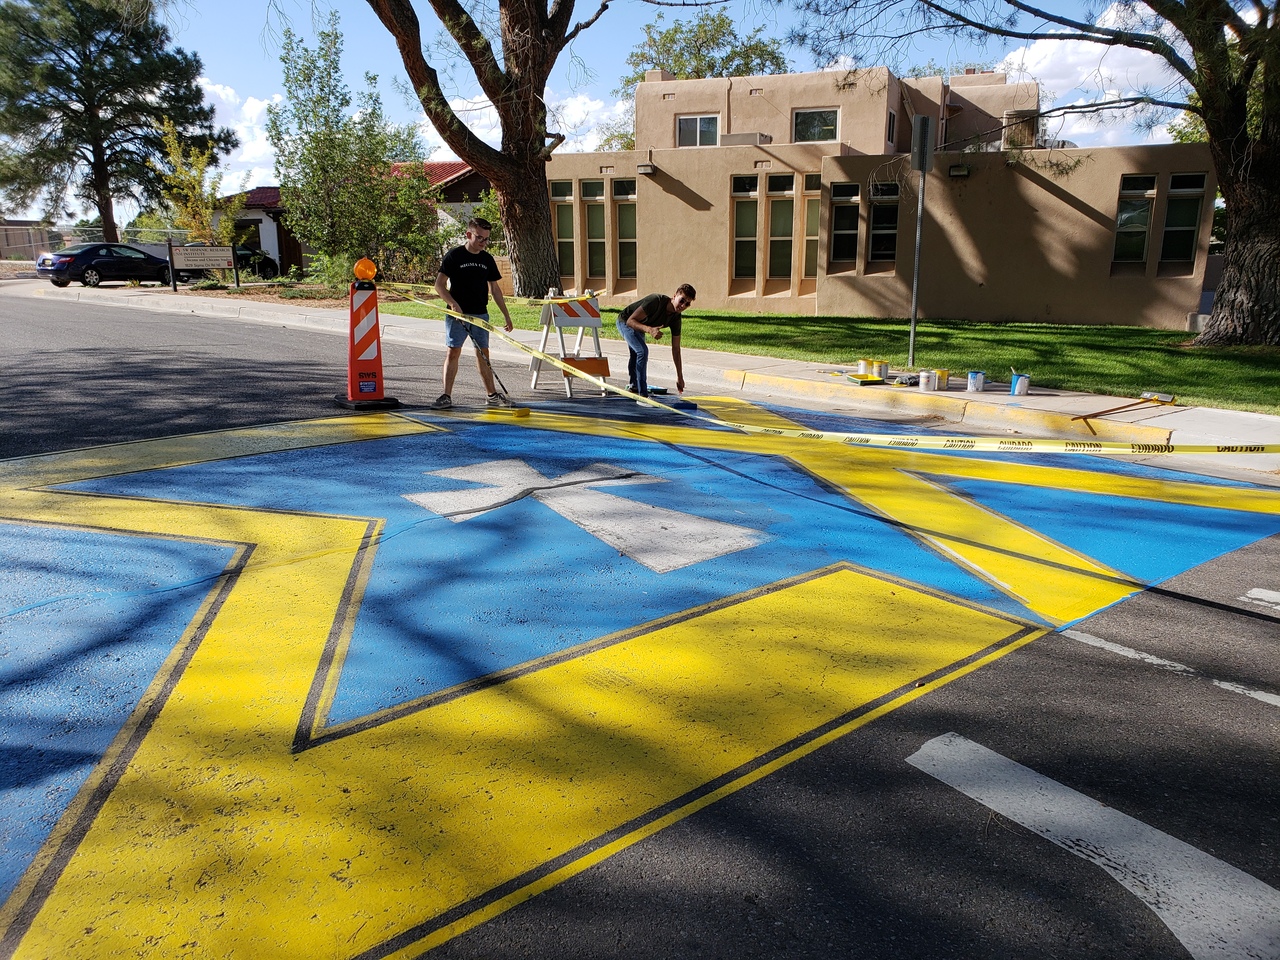 Our letter are painted every year at the East end of Sigma Chi Rd.